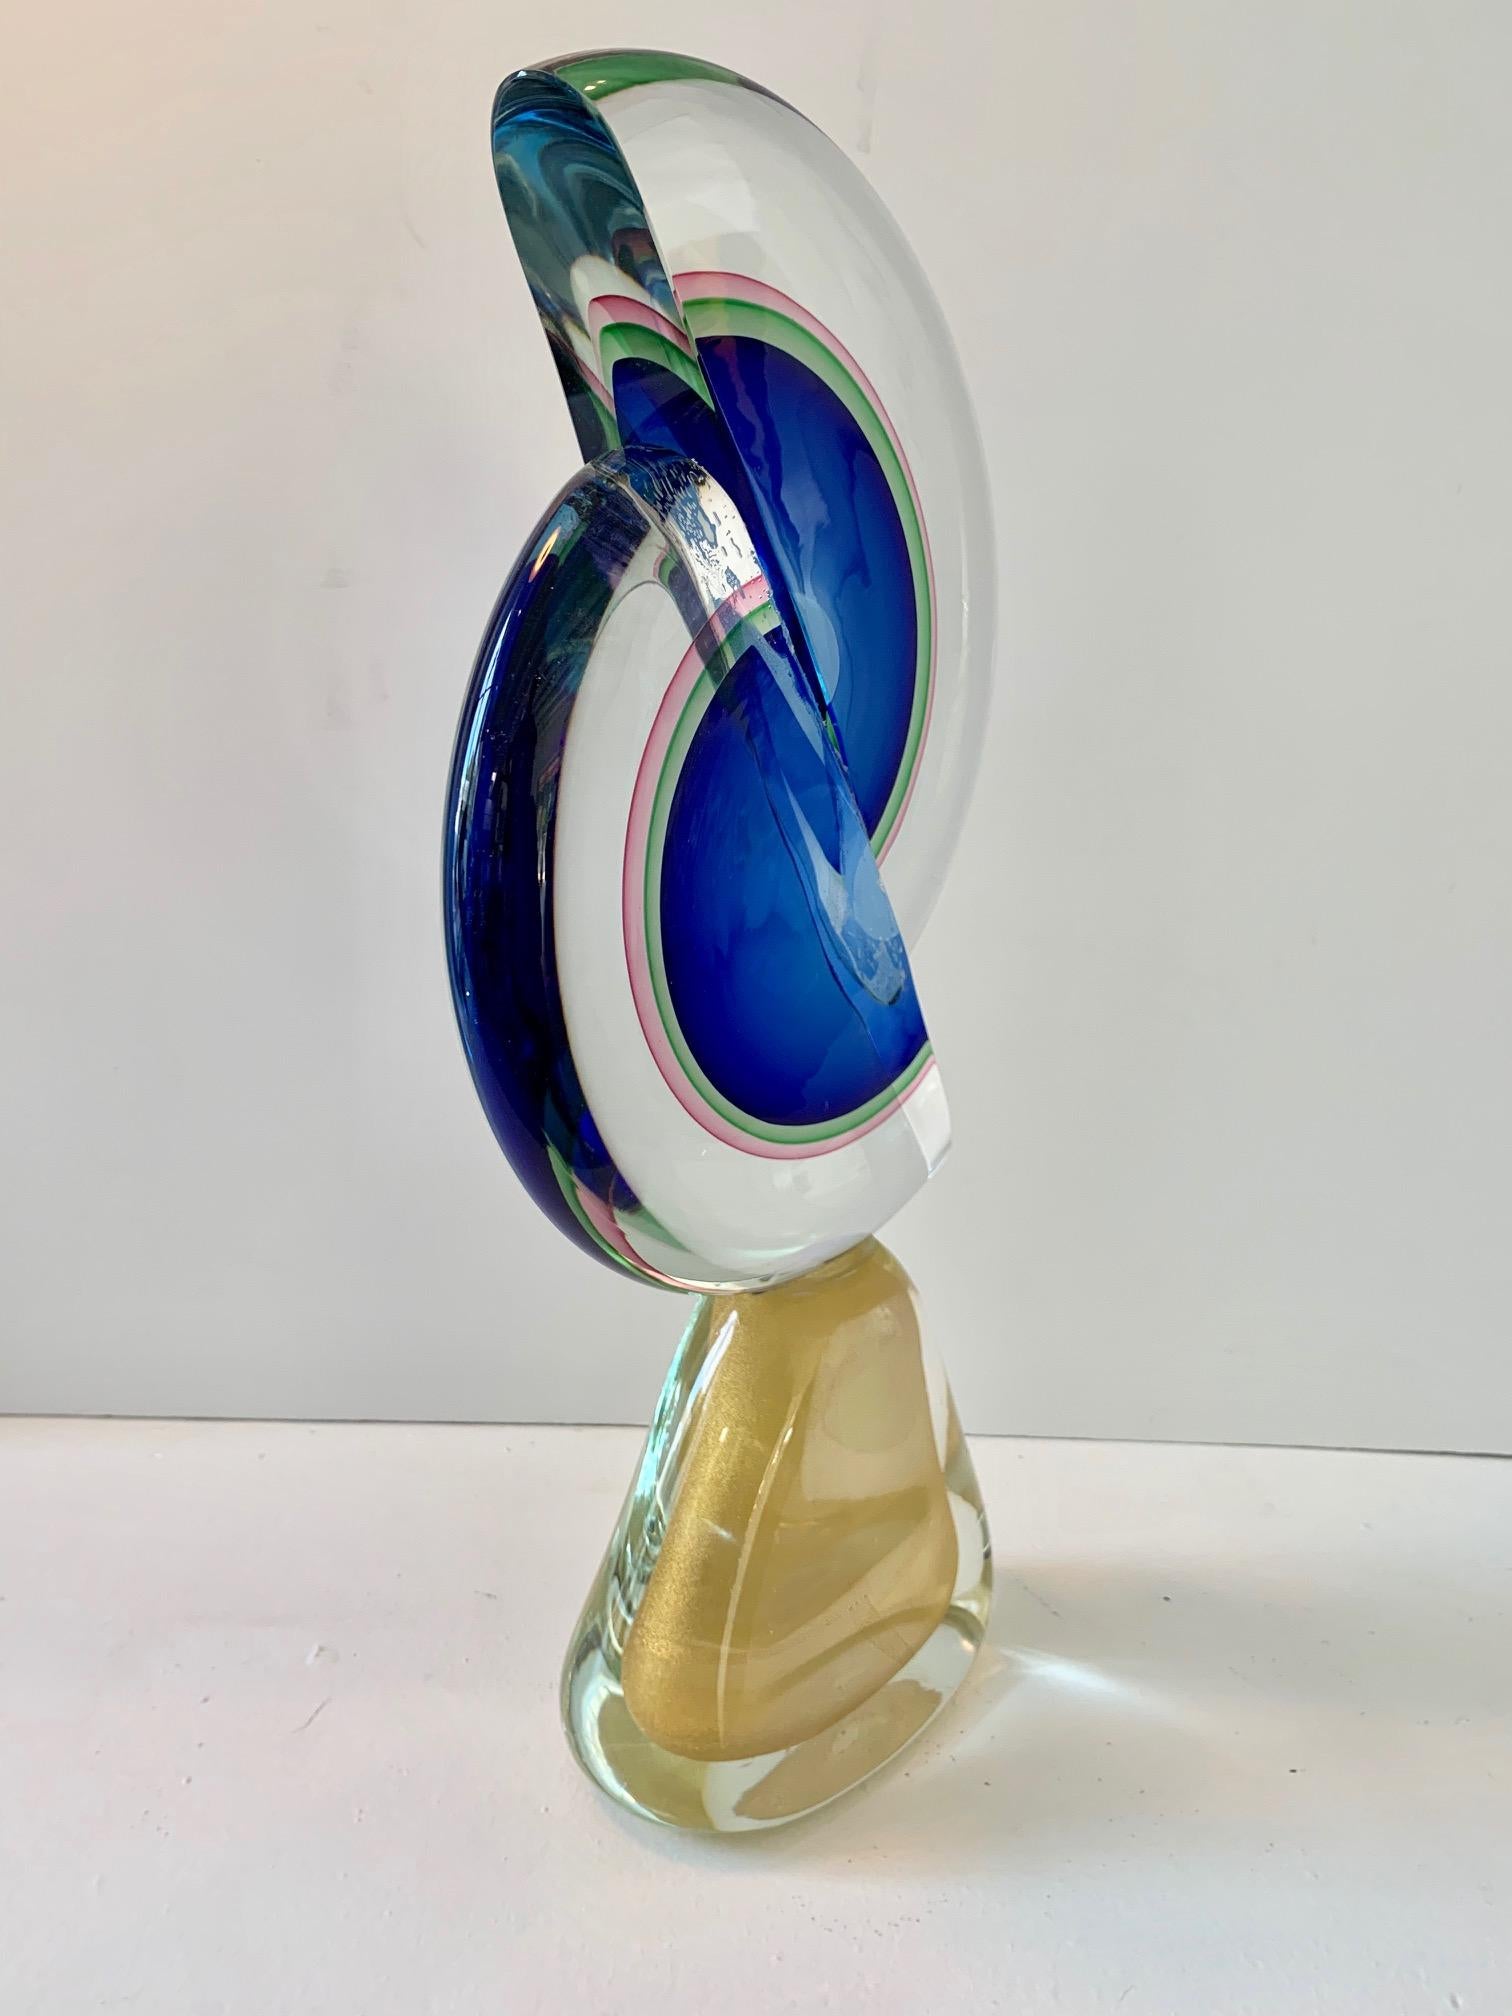 Large and spectacular Sommerso Murano sculpture. Very vibrant color with gold attached base.